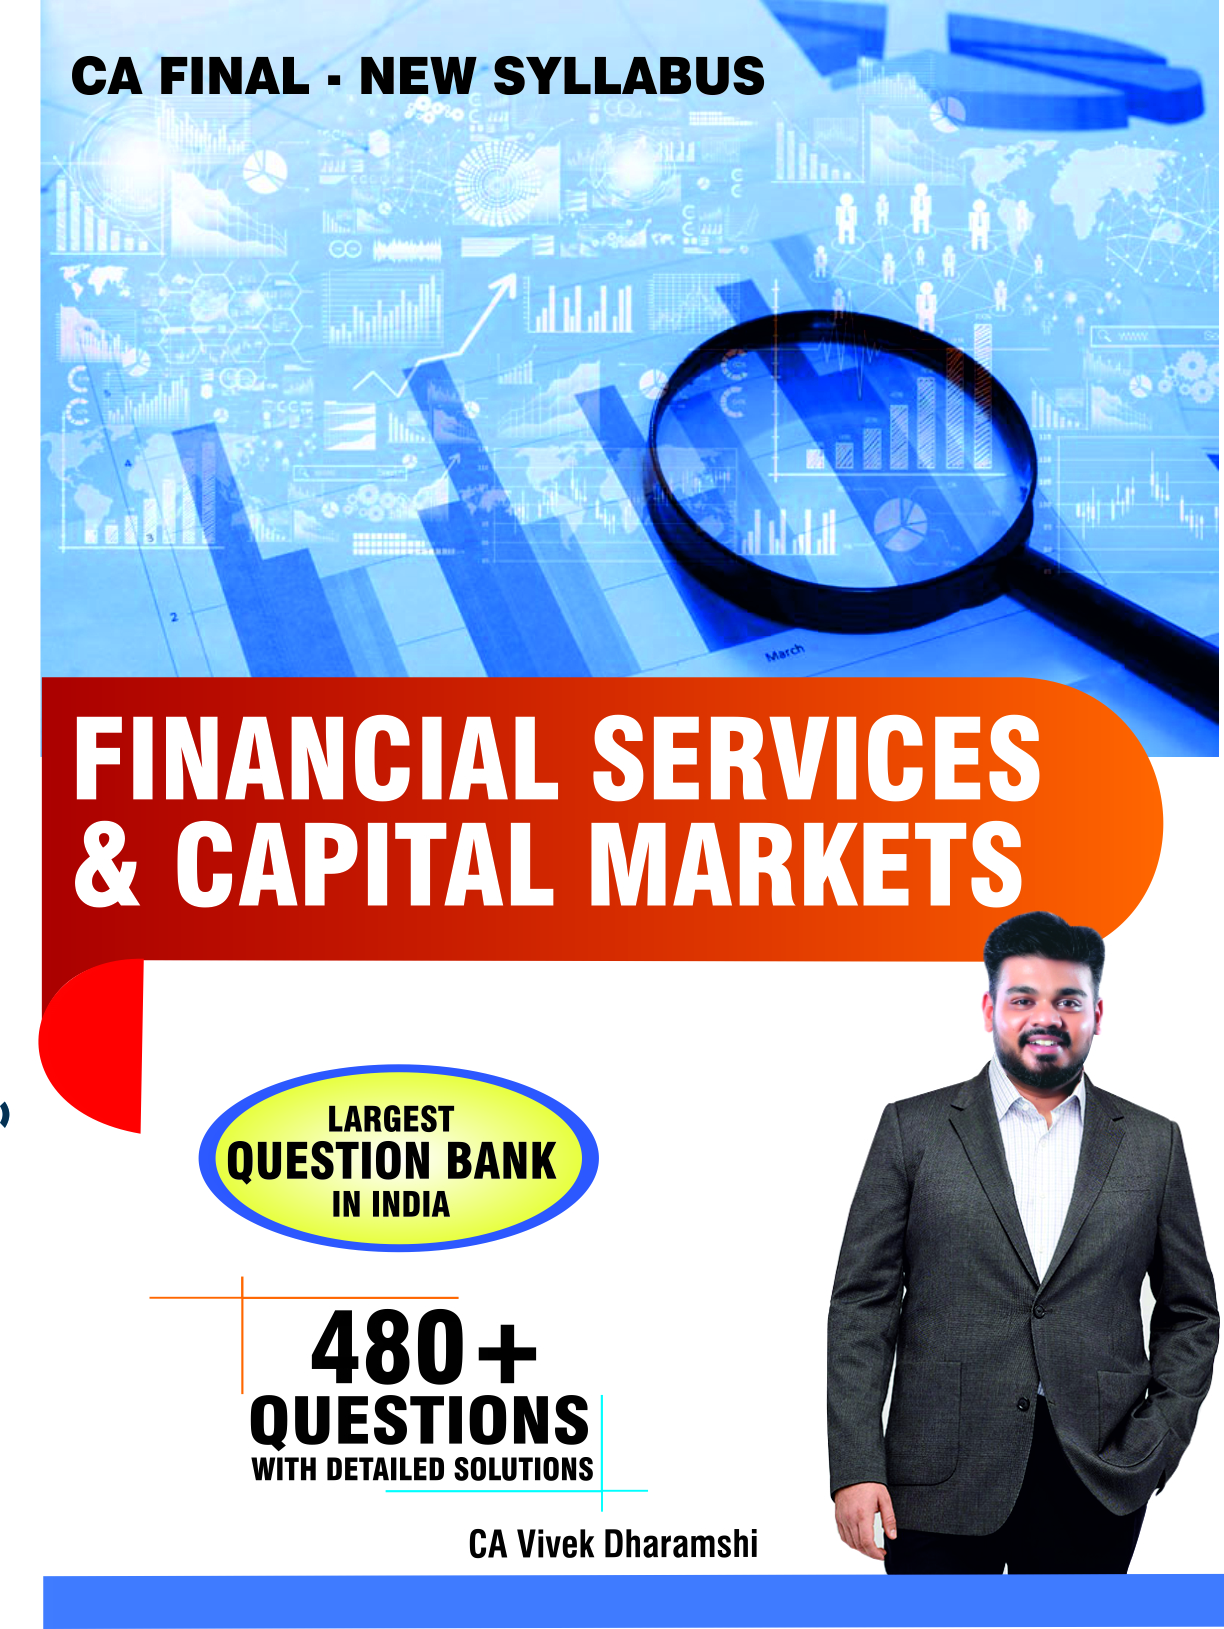 CA_Final_Financial_Services_and_Capital_Markets_|_New_Syllabus_|_480_Questions_with_Detailed_Solutions